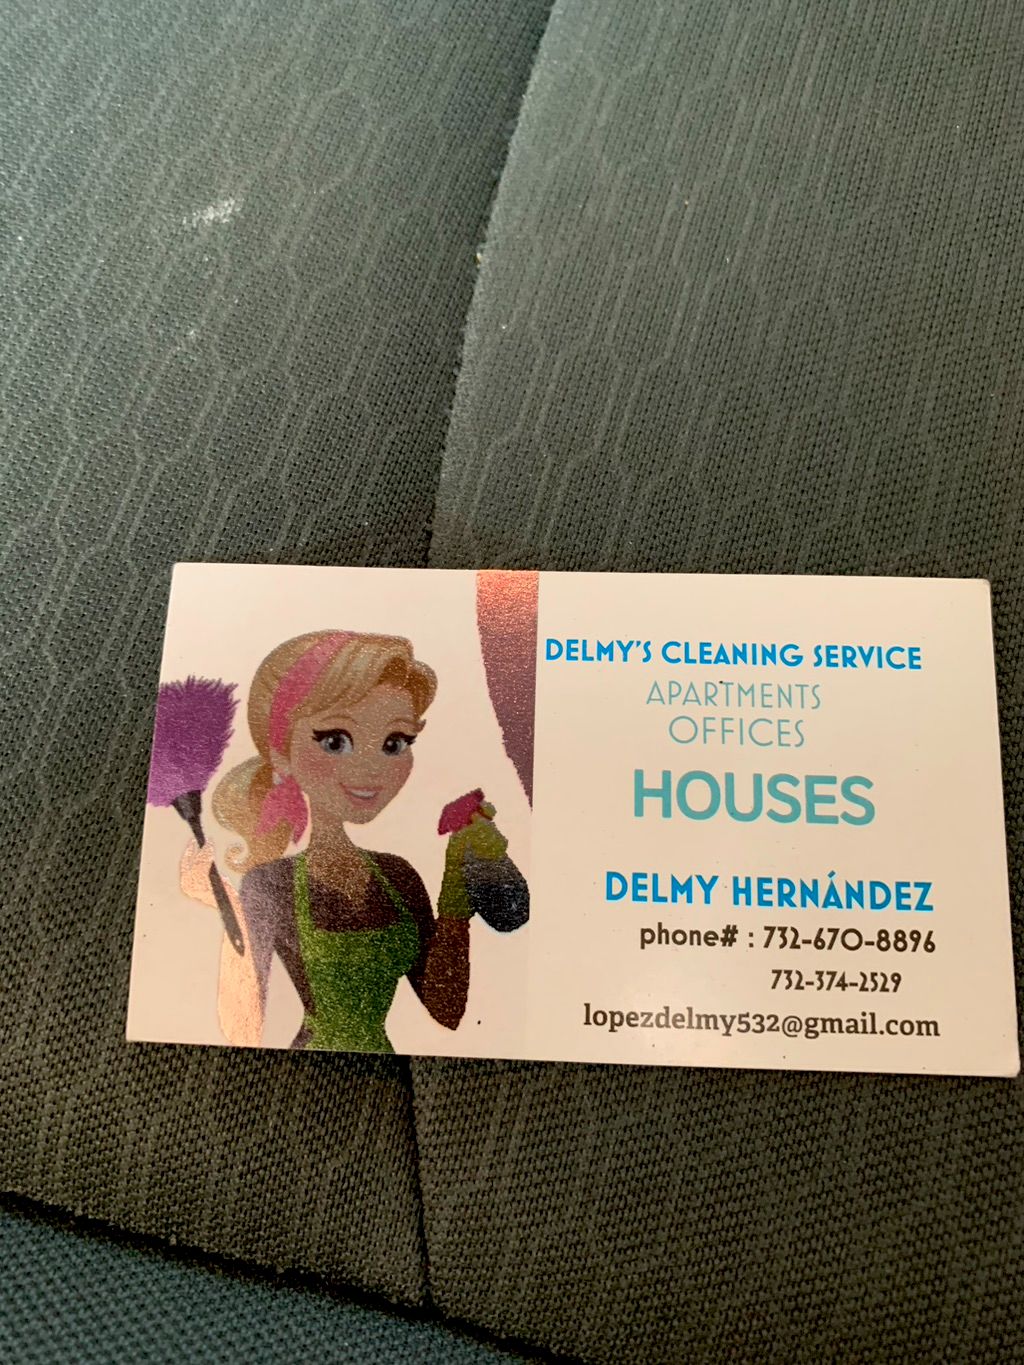 Delmy’s cleaning service